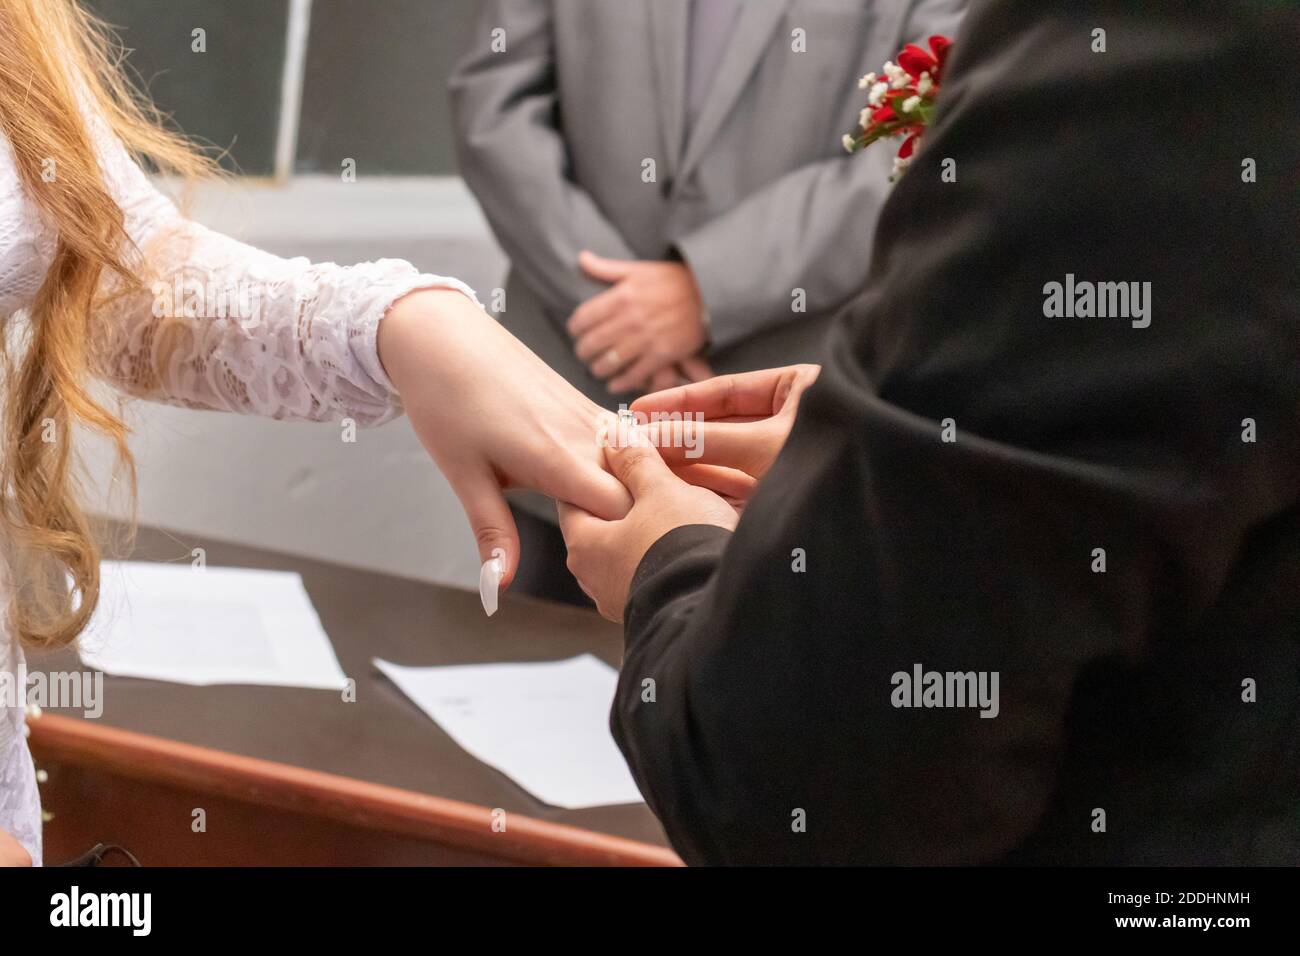 Holding hands with wedding rings Stock Photo